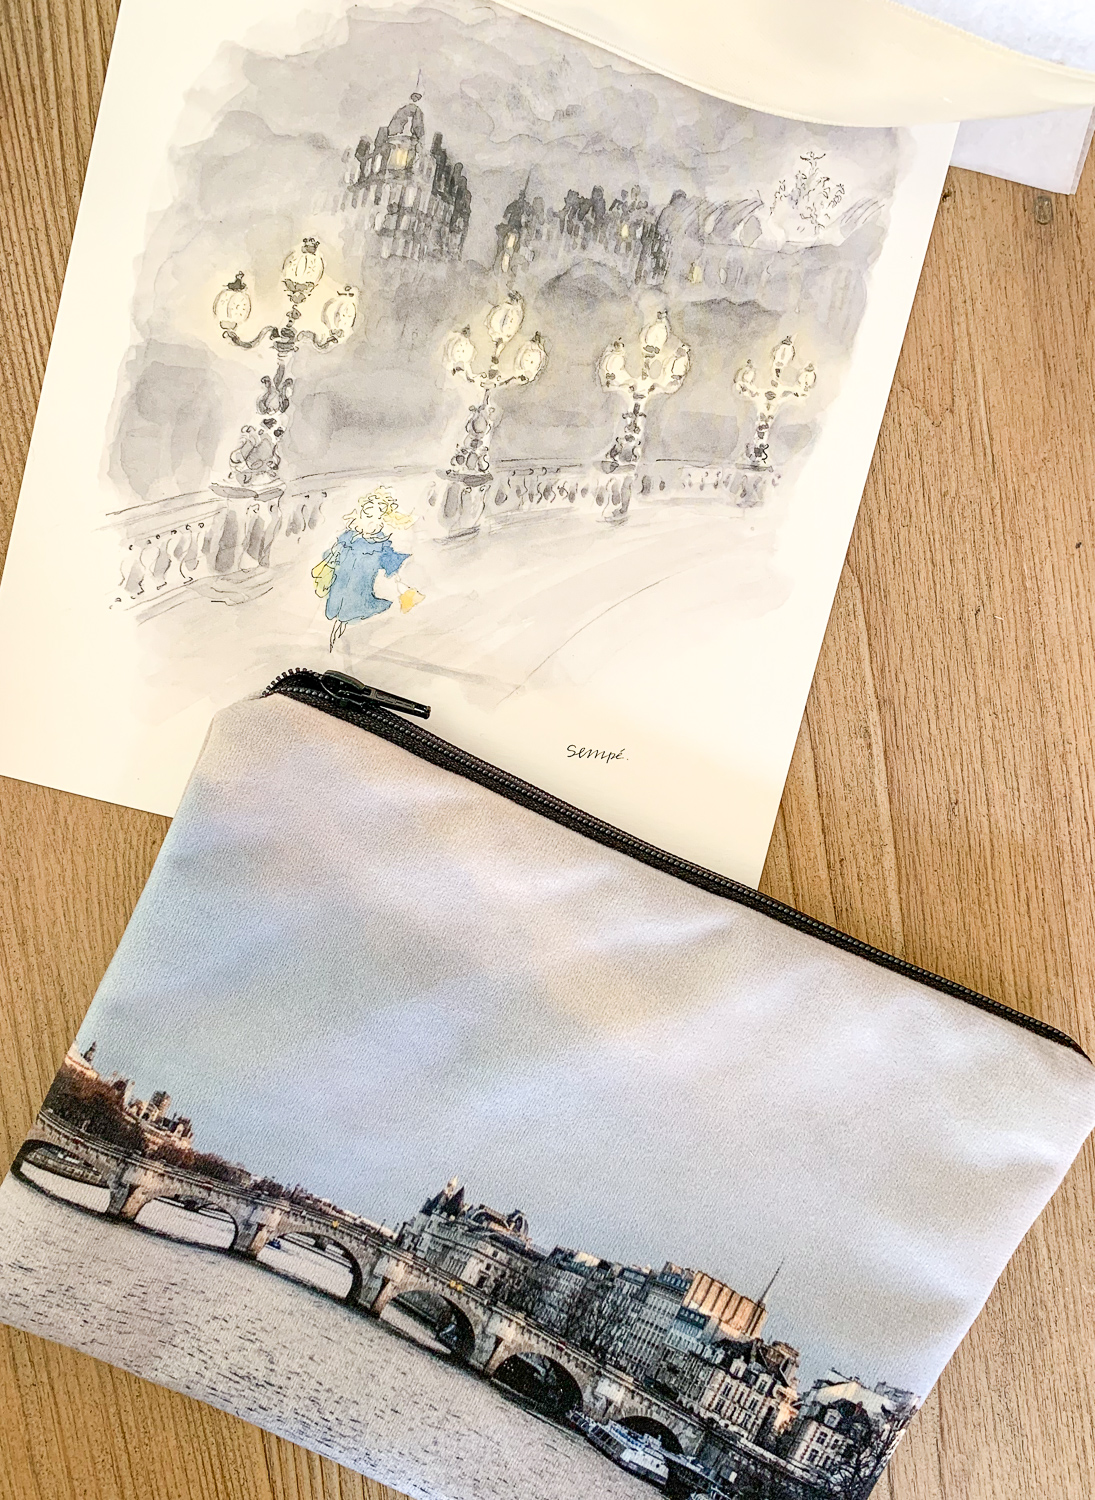 Included in My Stylish French Box, a charming print and pouch both with images of Paris. Details at une femme d'un certain age.